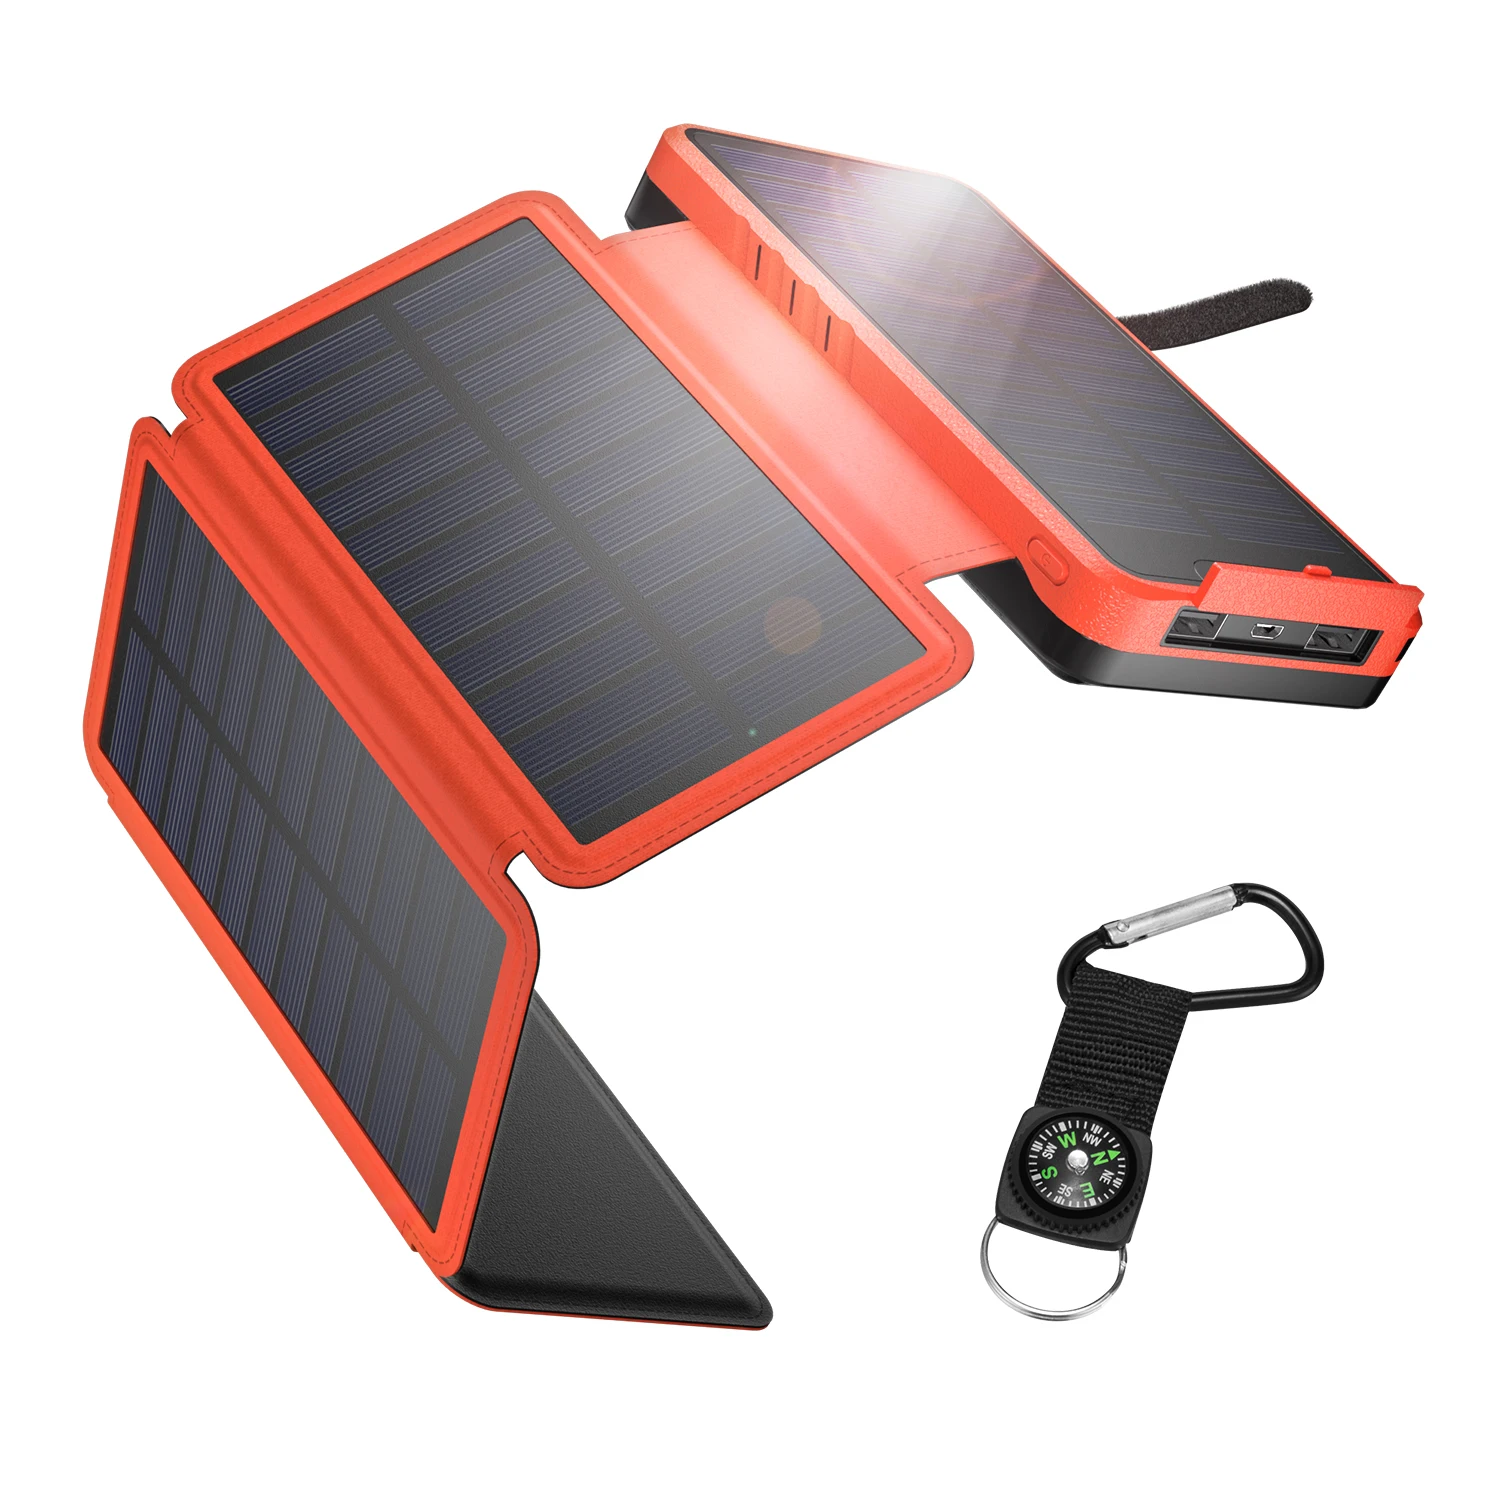 Hot Sale High Quality Large Capacity 26800mAh Portable Solar Charger IP65 Waterproof Foldable Solar Power Bank with Solar Panels